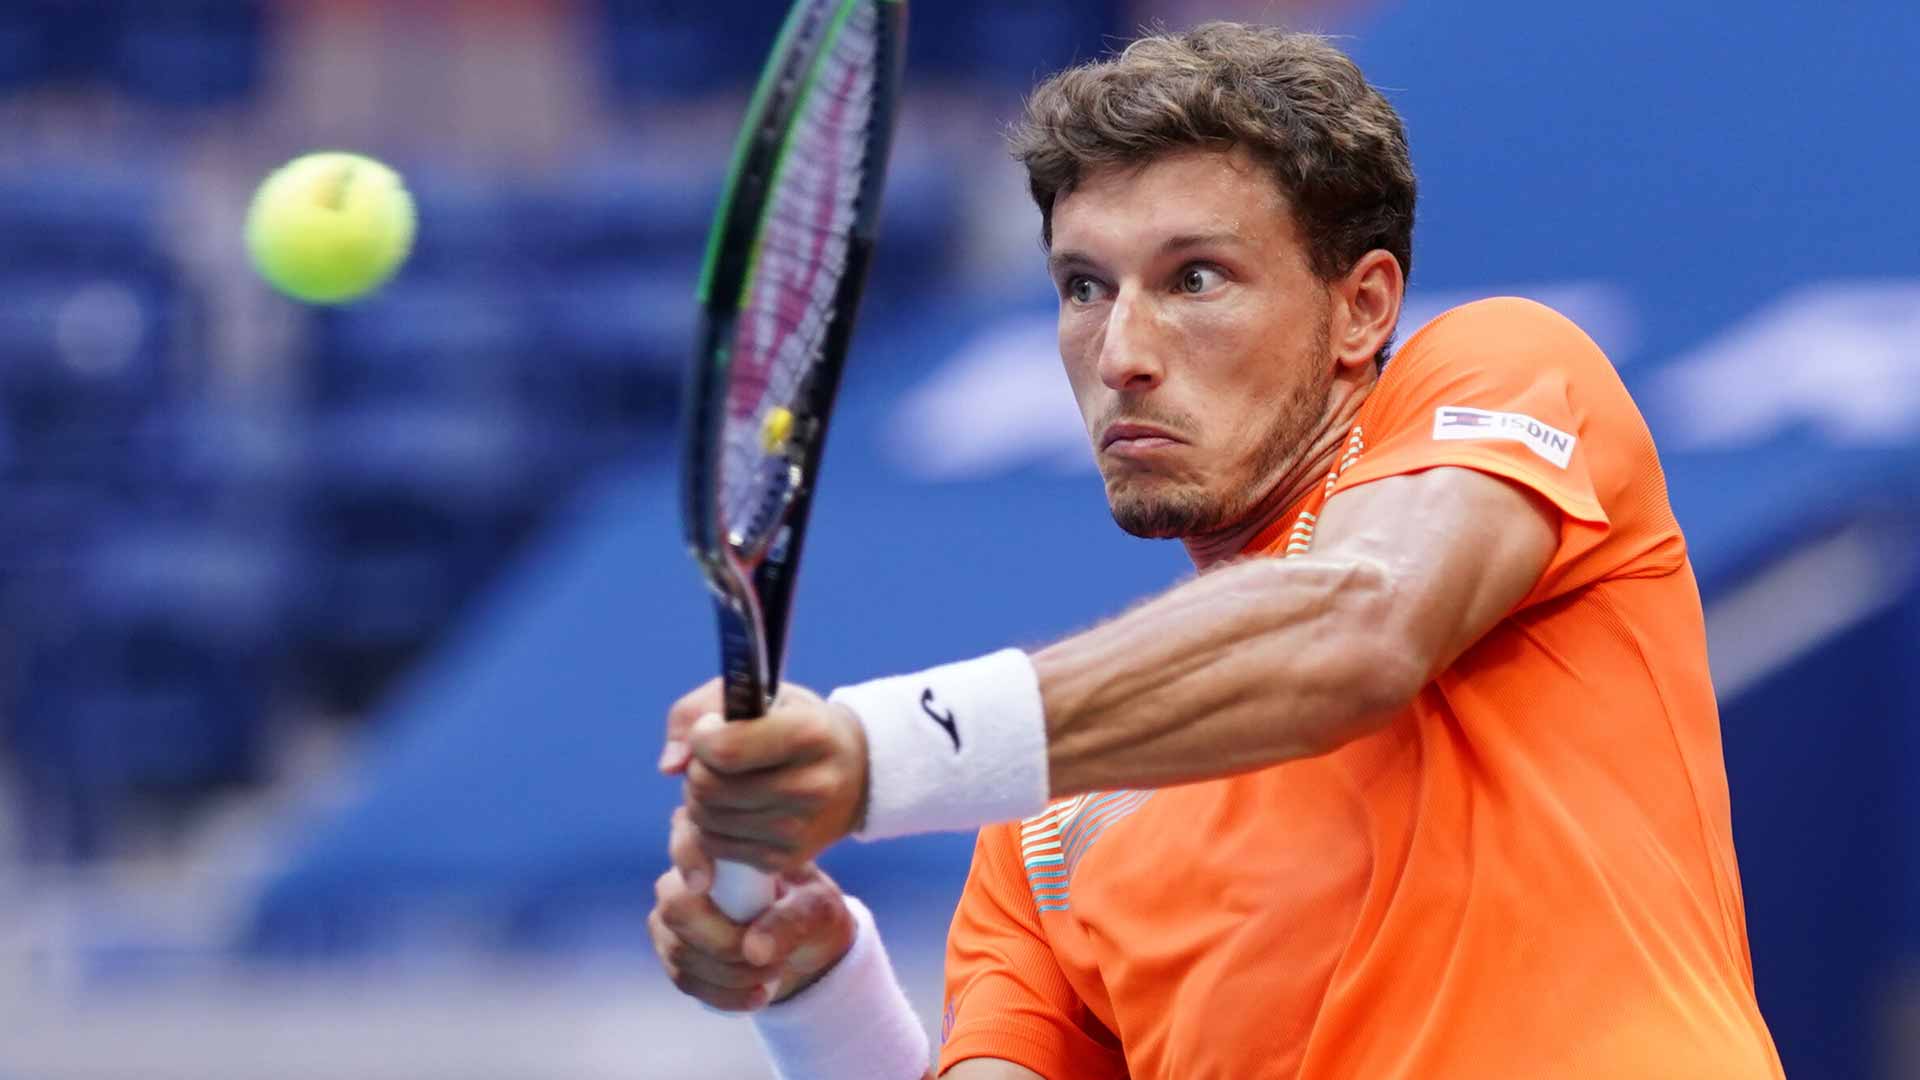 Pablo Carreno Busta On US Open Run: 'It's Not Enough To Make The ...